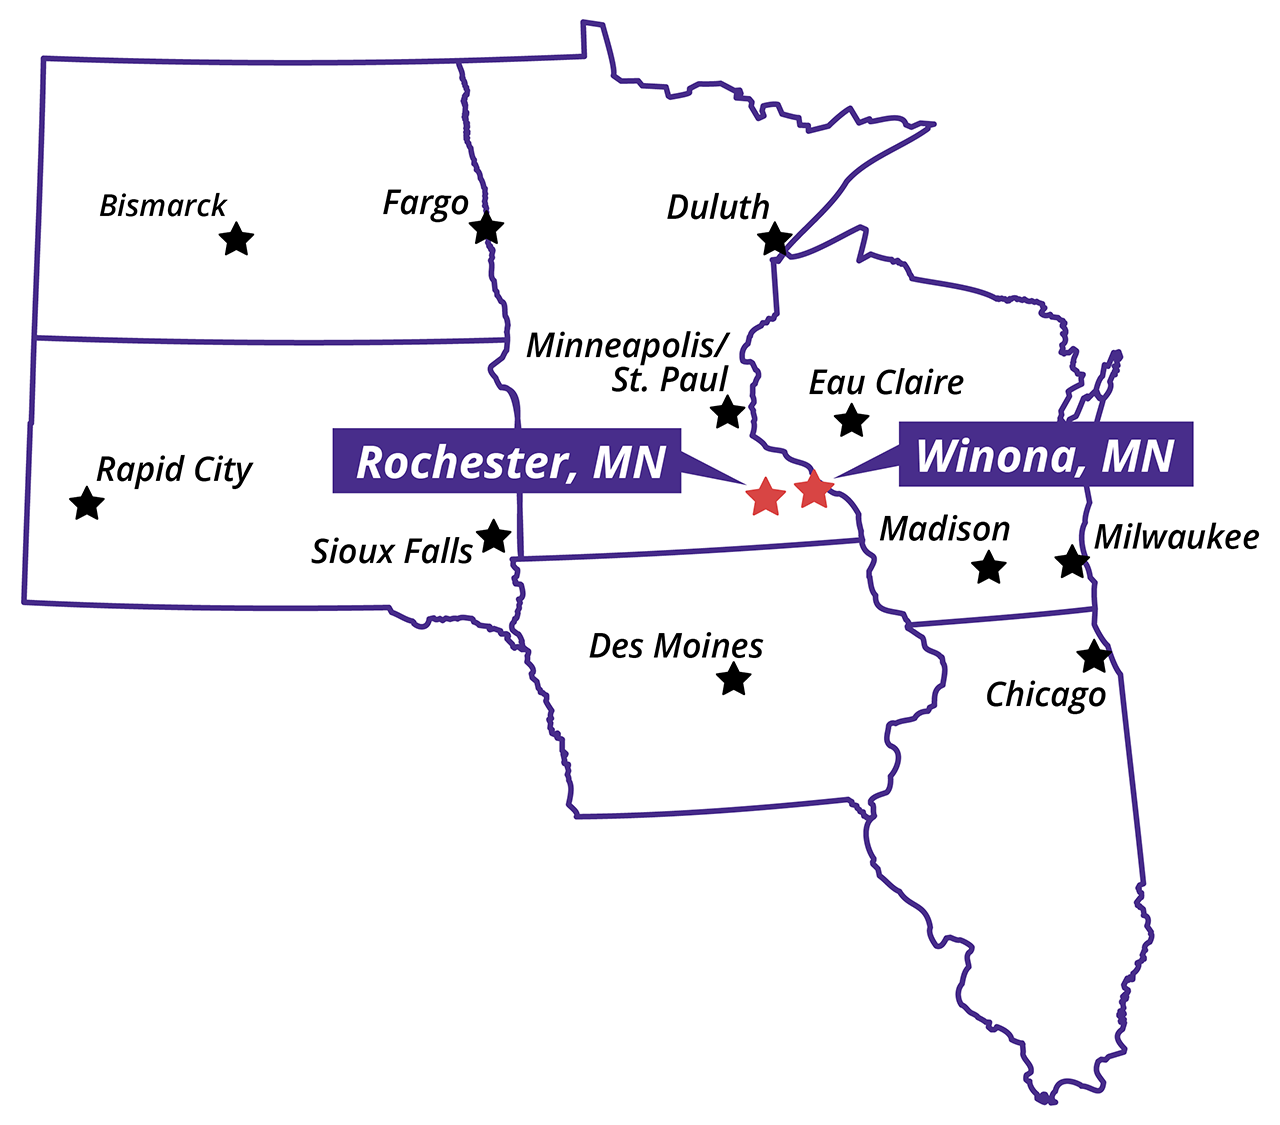 Outline map of Midwest states showing Winona's location relative to Rochester, Twin Cities, Eau Clair, Madison, Chicago and other major cities.